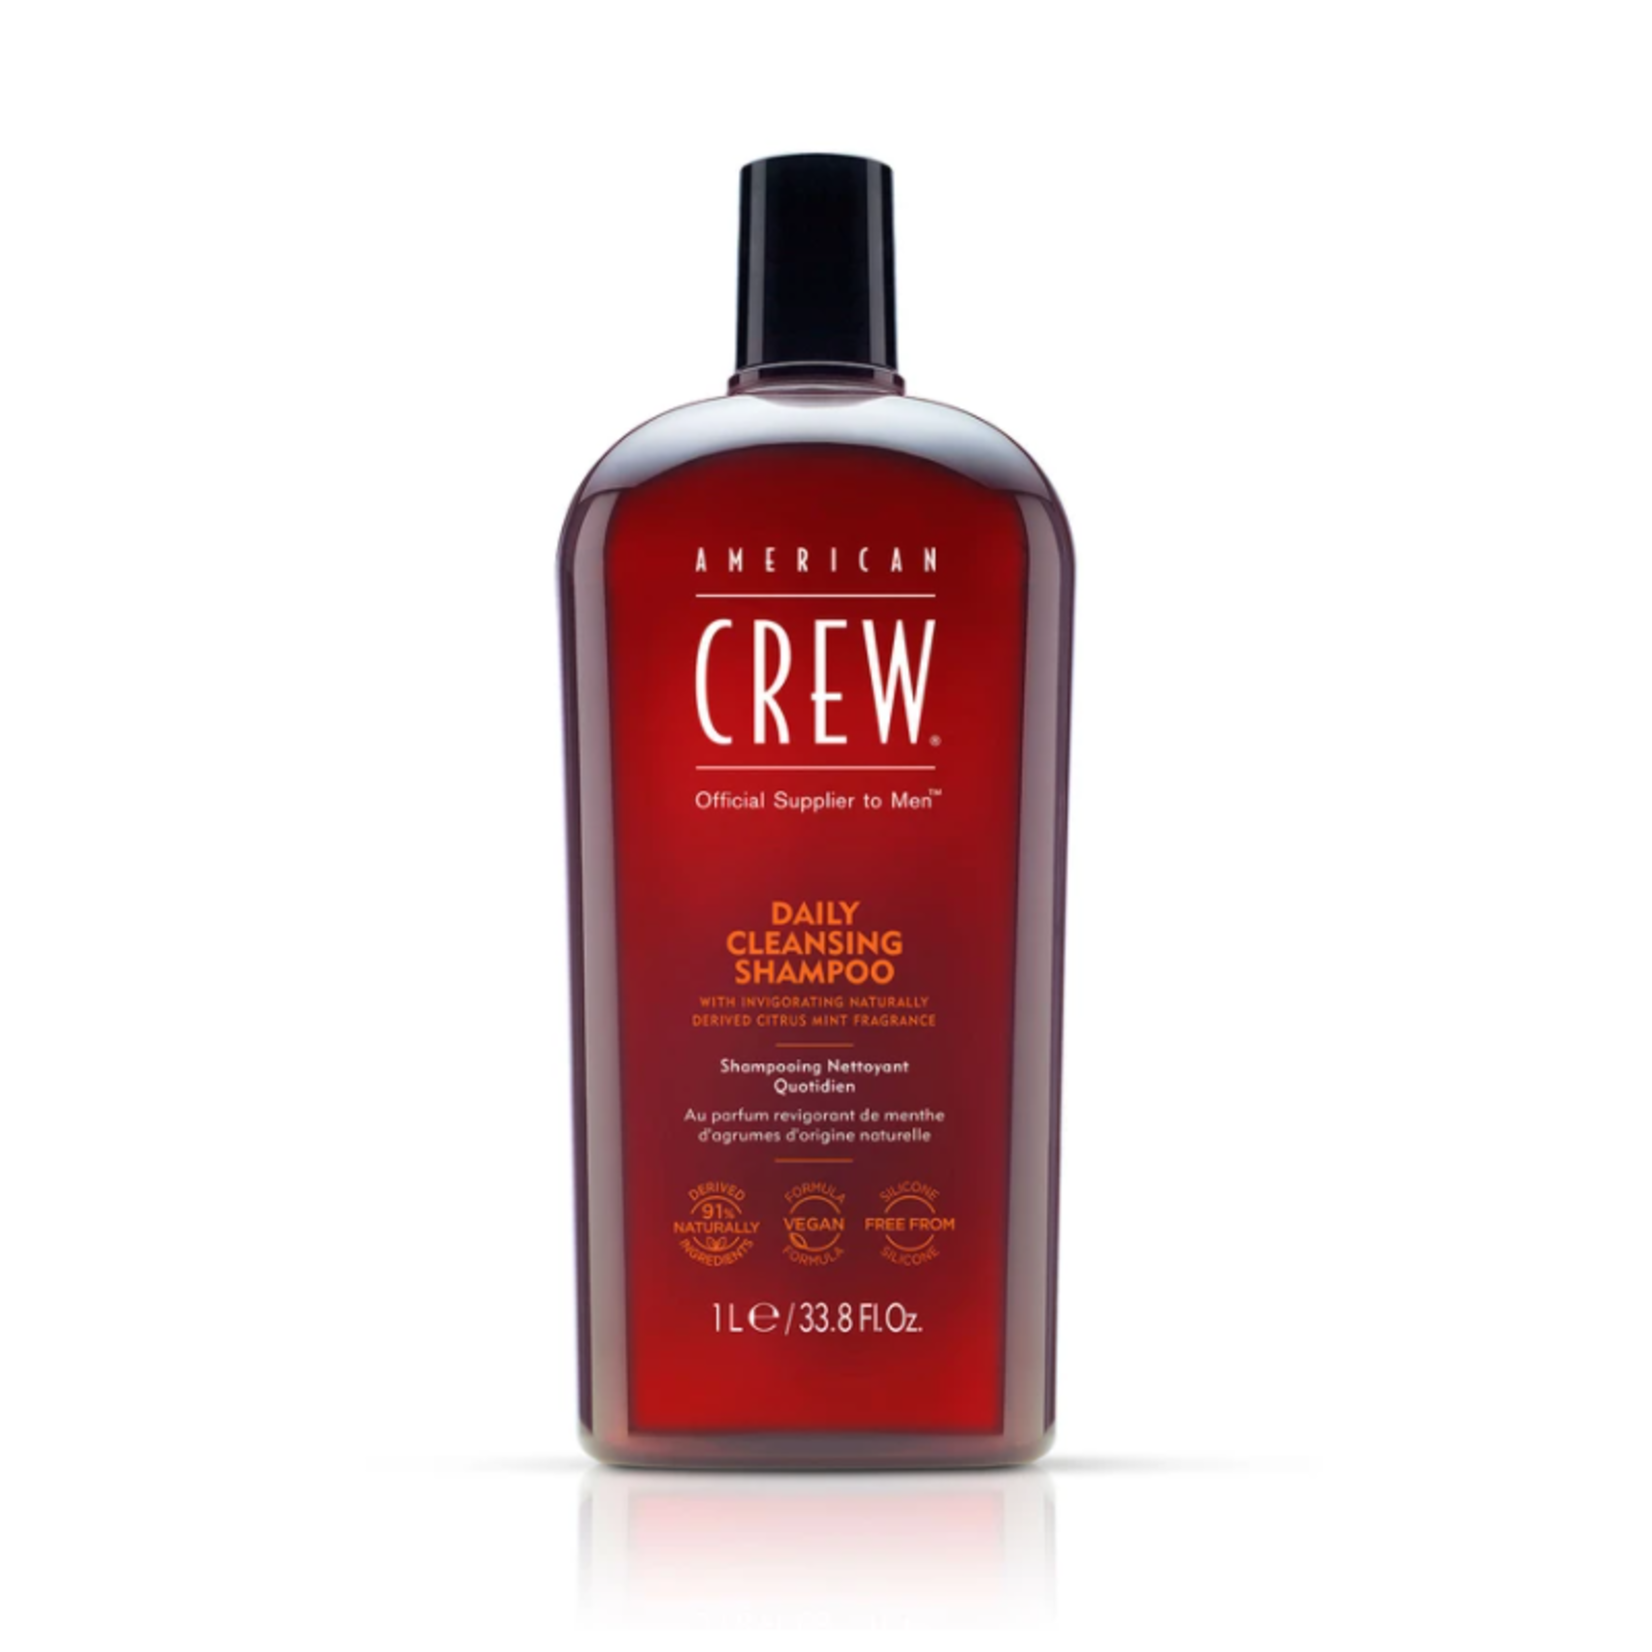 American Crew American Crew - Daily cleansing shampoo 1 Liter